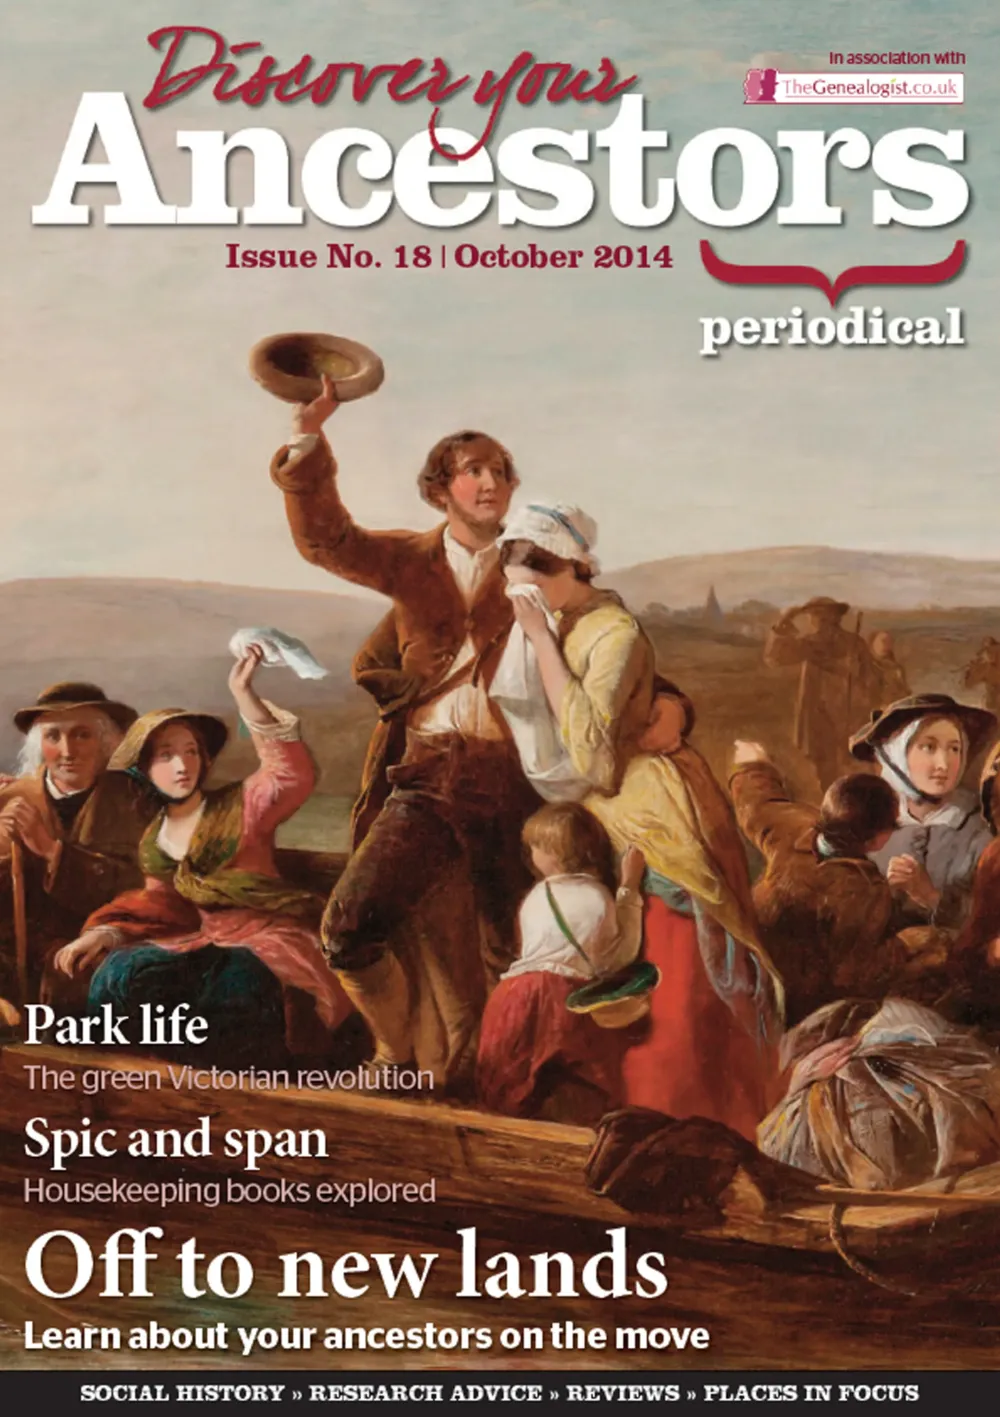 Discover Your Ancestors Periodical - October 2014